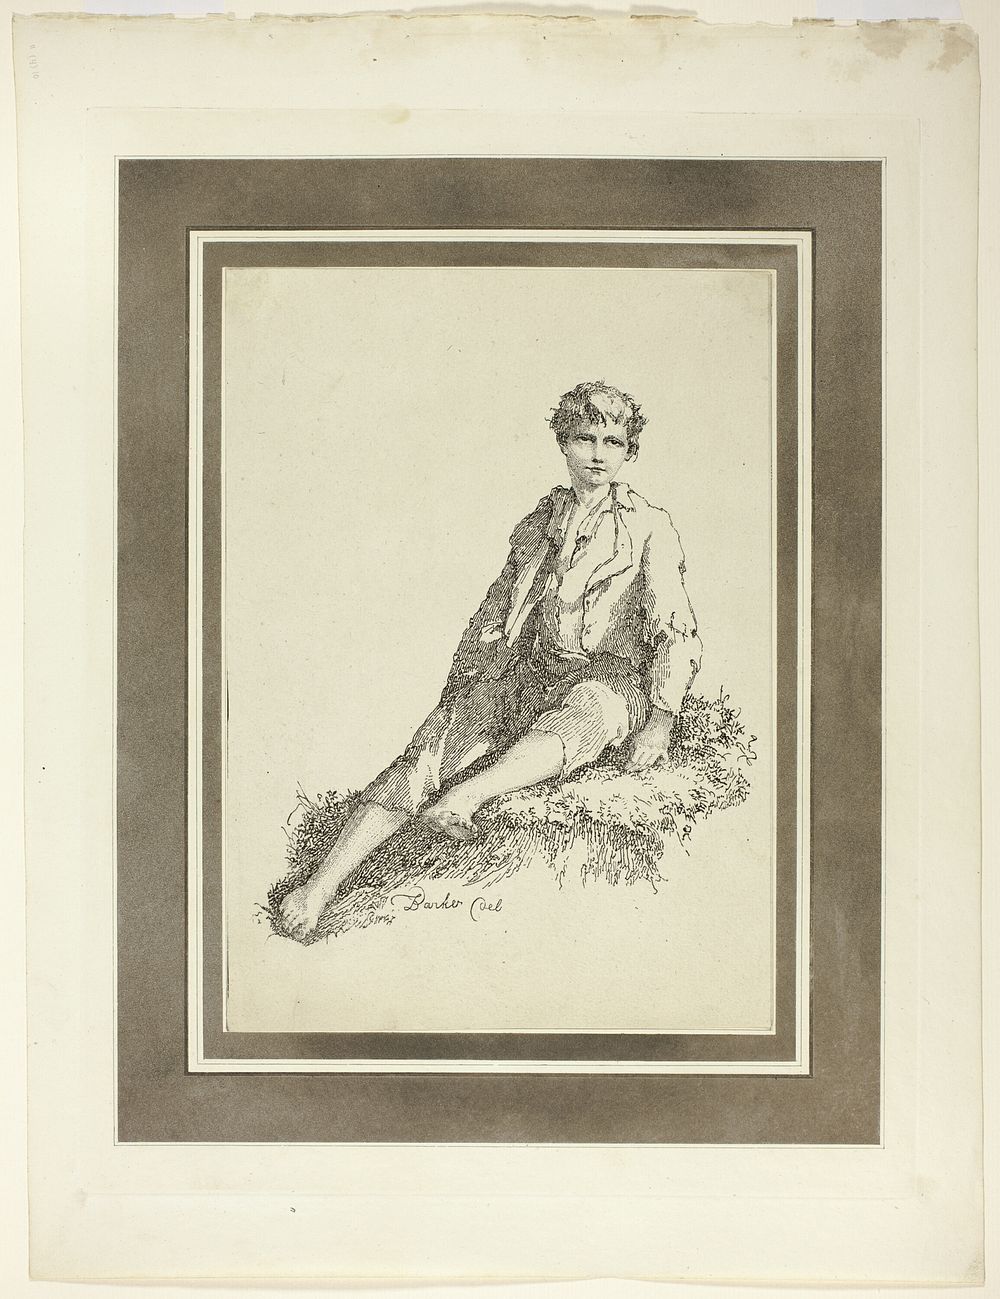 Young Boy Seated, from the first issue of Specimens of Polyautography by Thomas Barker